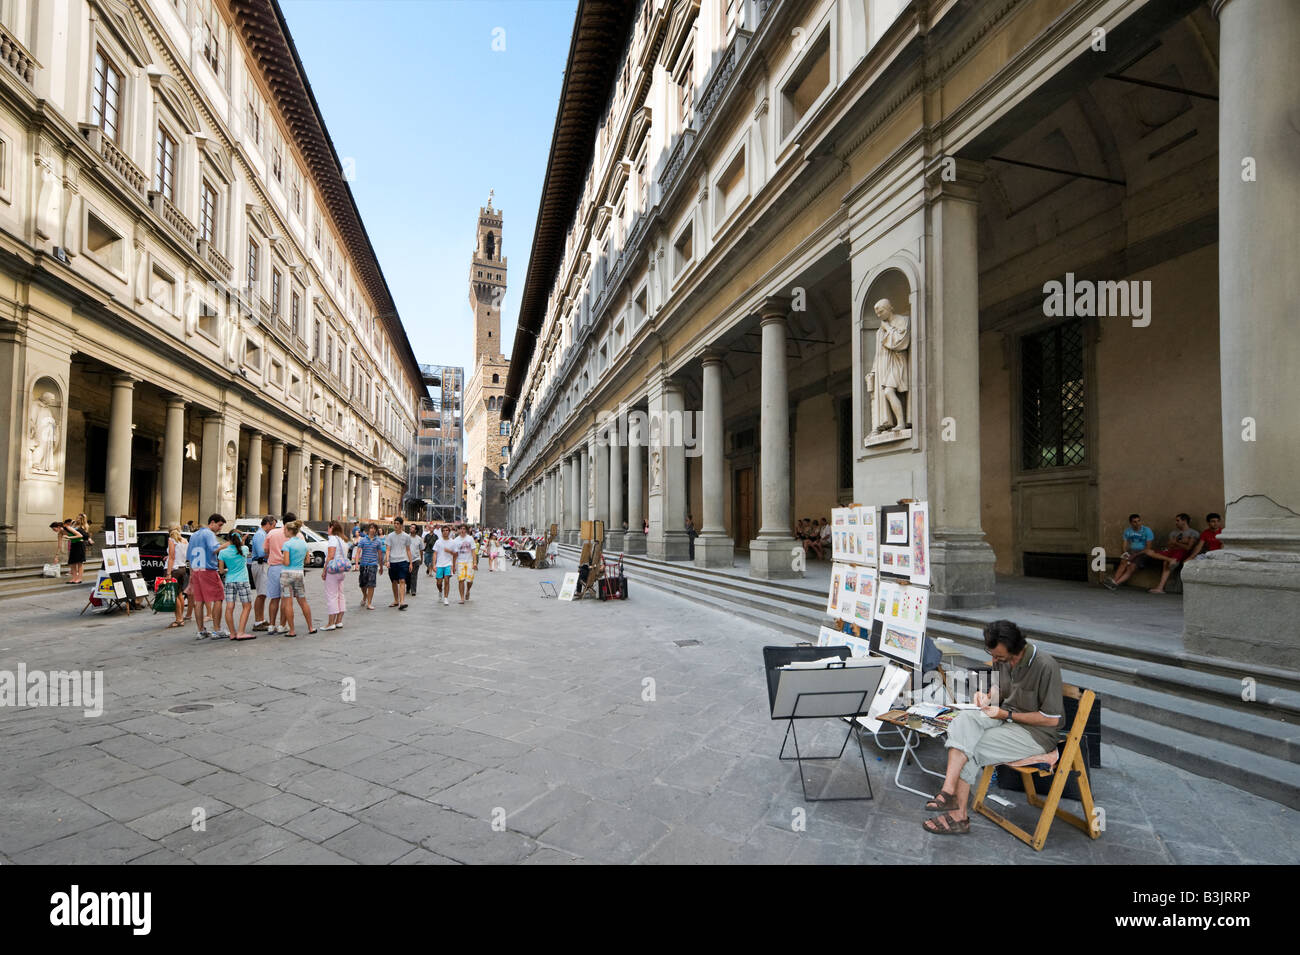 The Uffizi Gallery with the Palazzo Vecchio in distance, Florence, Tuscany, Italy Stock Photo